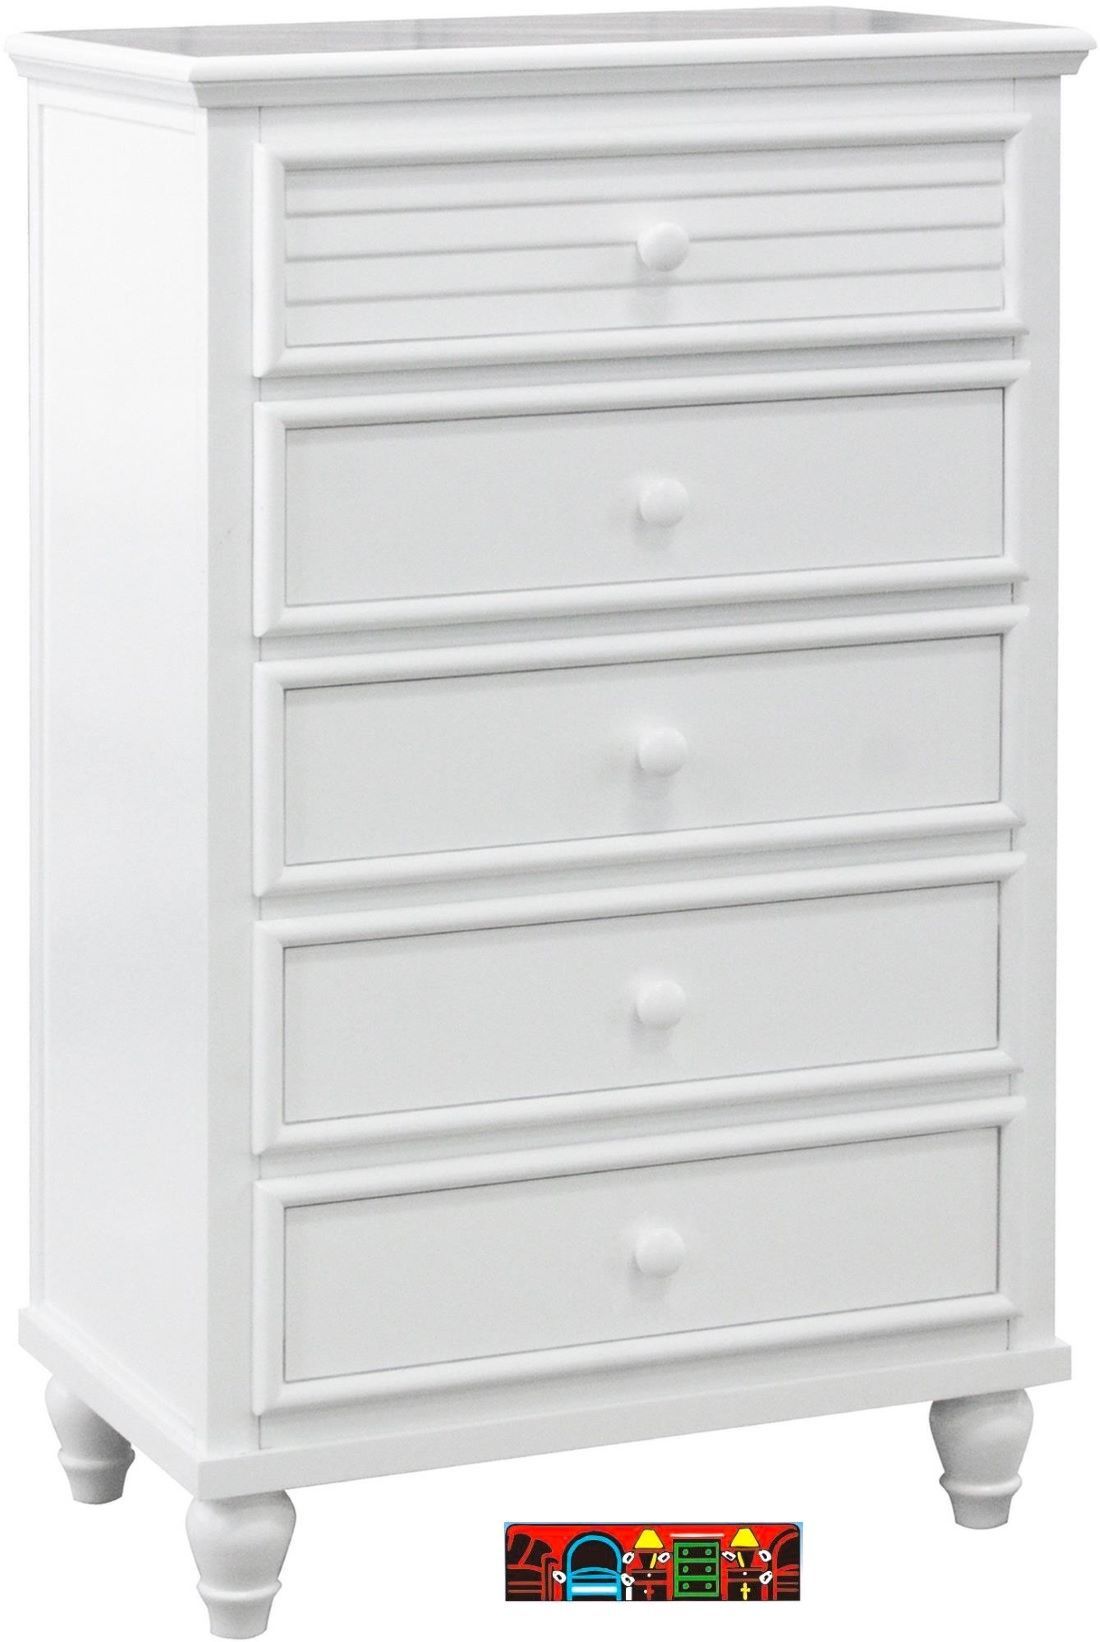 Sunset Chest, crafted from solid wood, featuring a white finish, five drawers and louver accents.